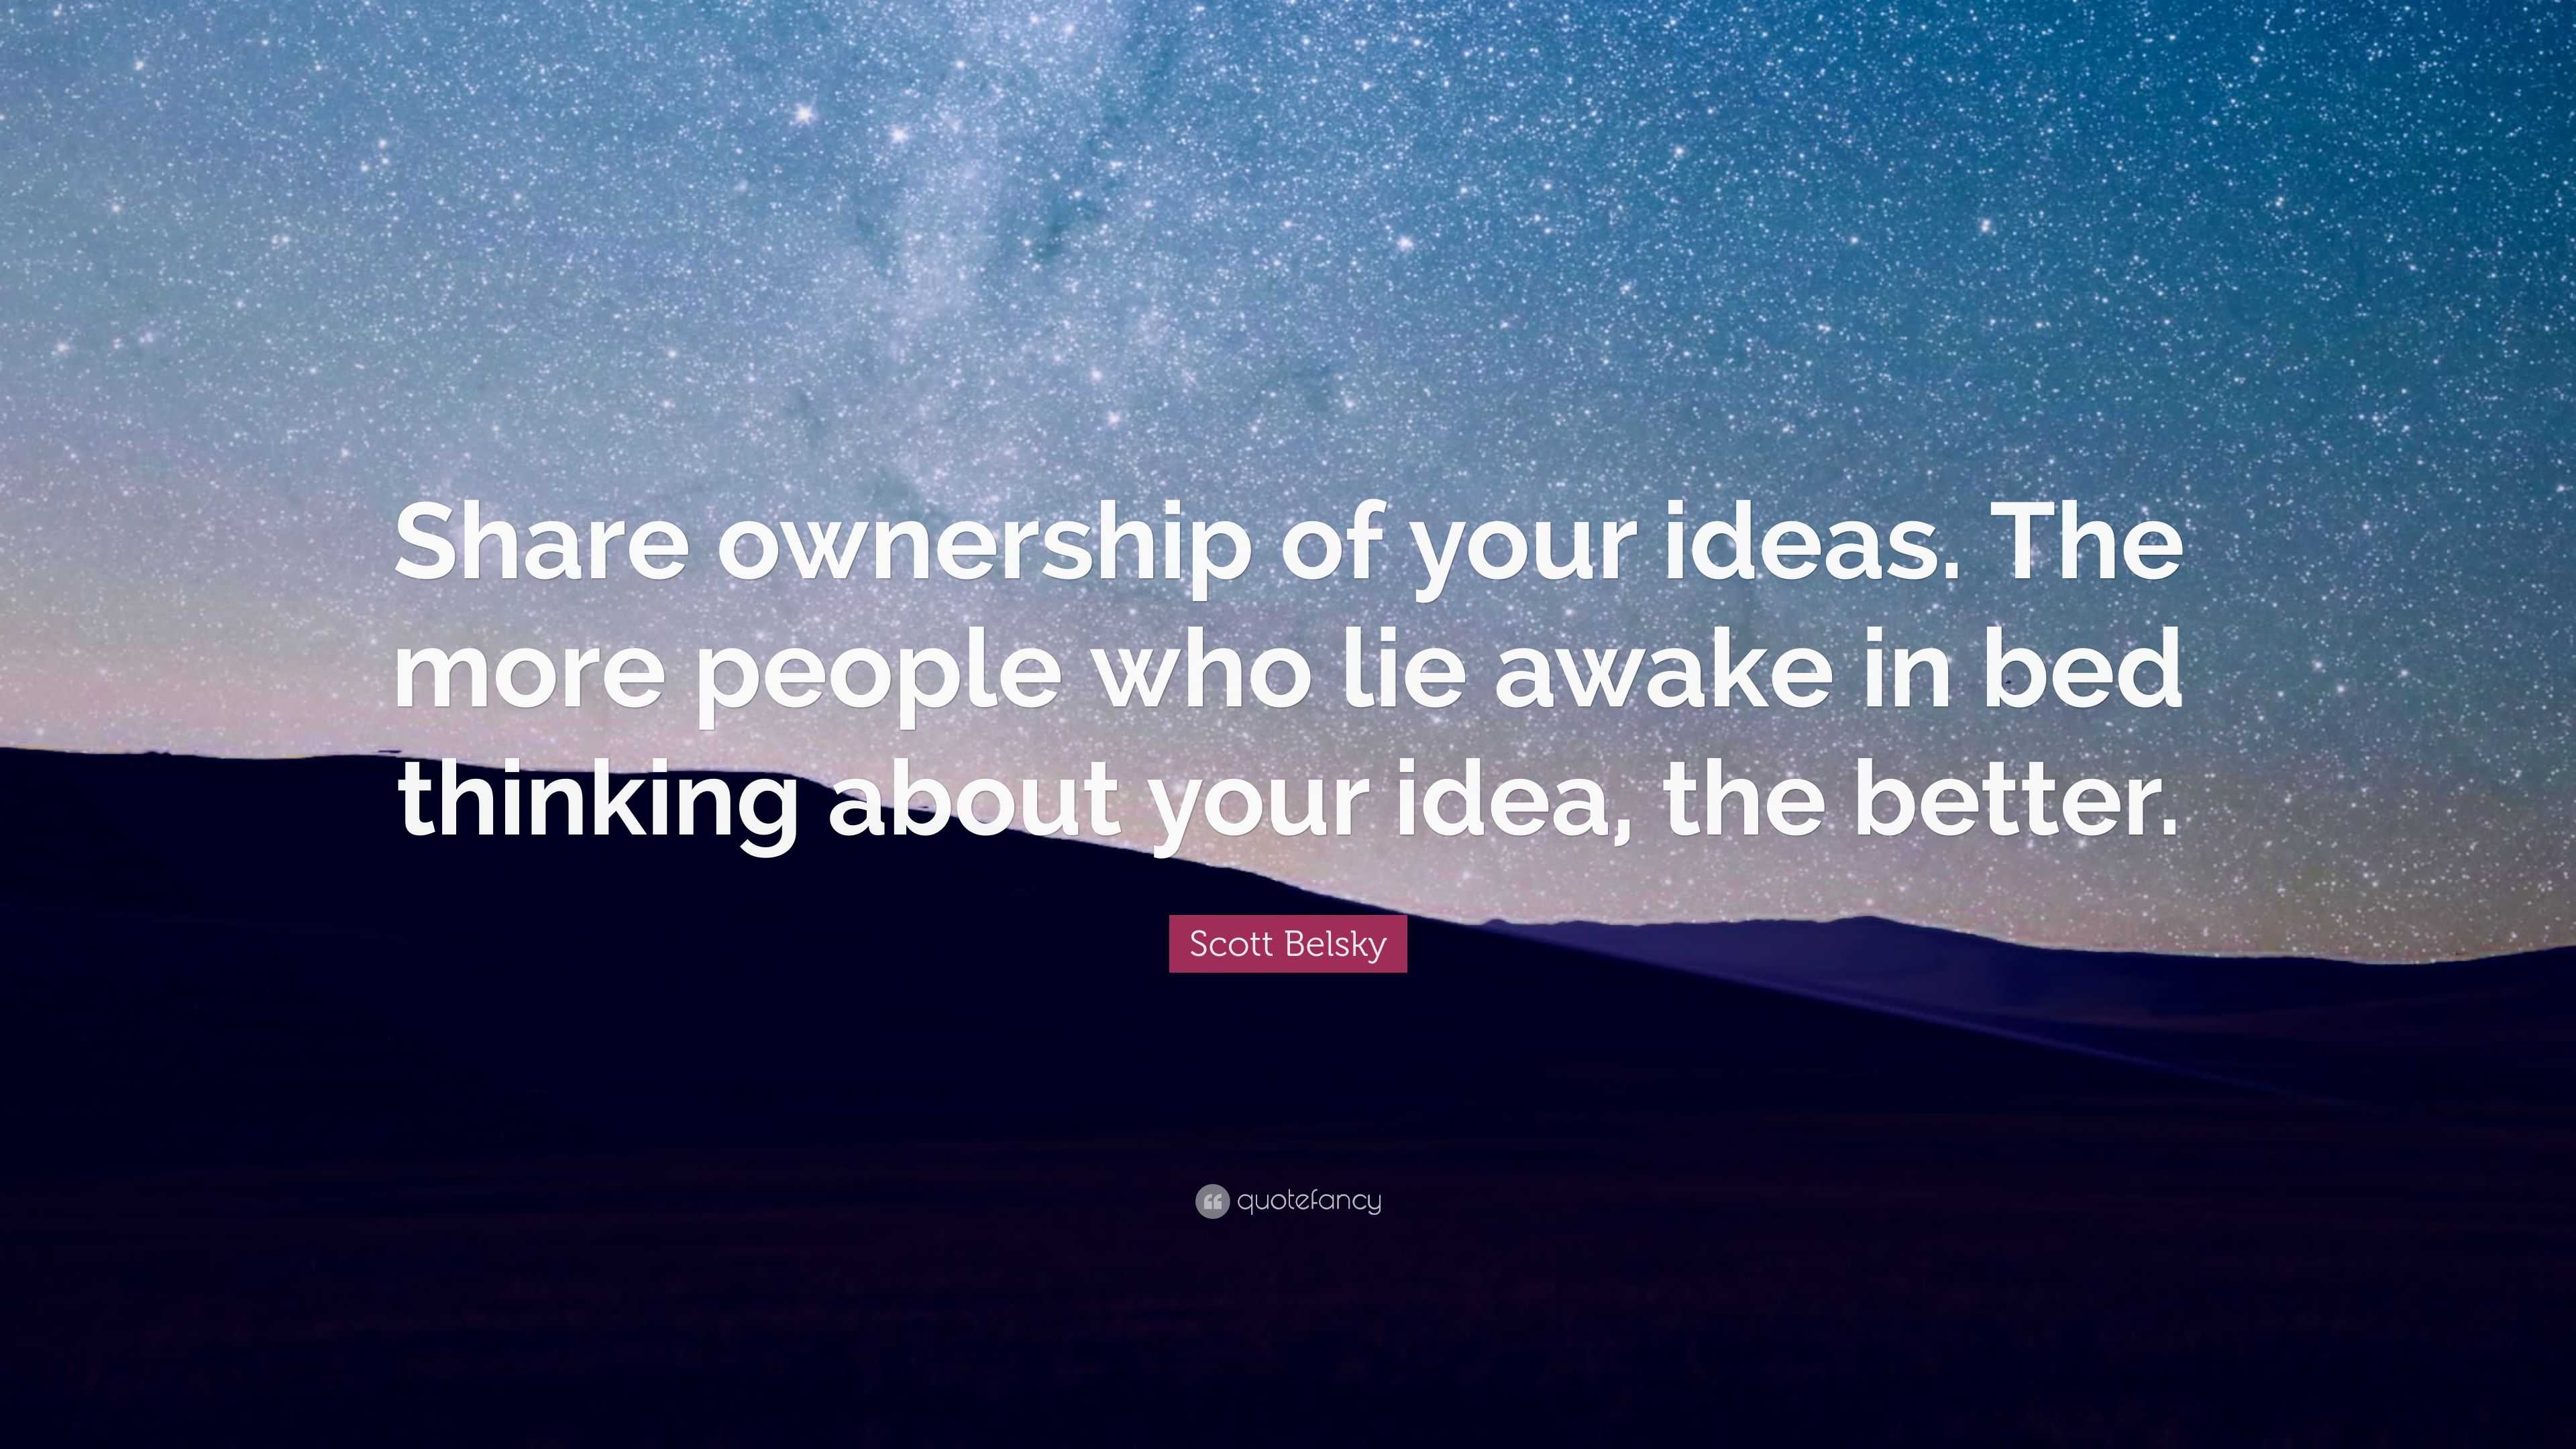 Scott Belsky Quote: “Share ownership of your ideas. The more people who ...